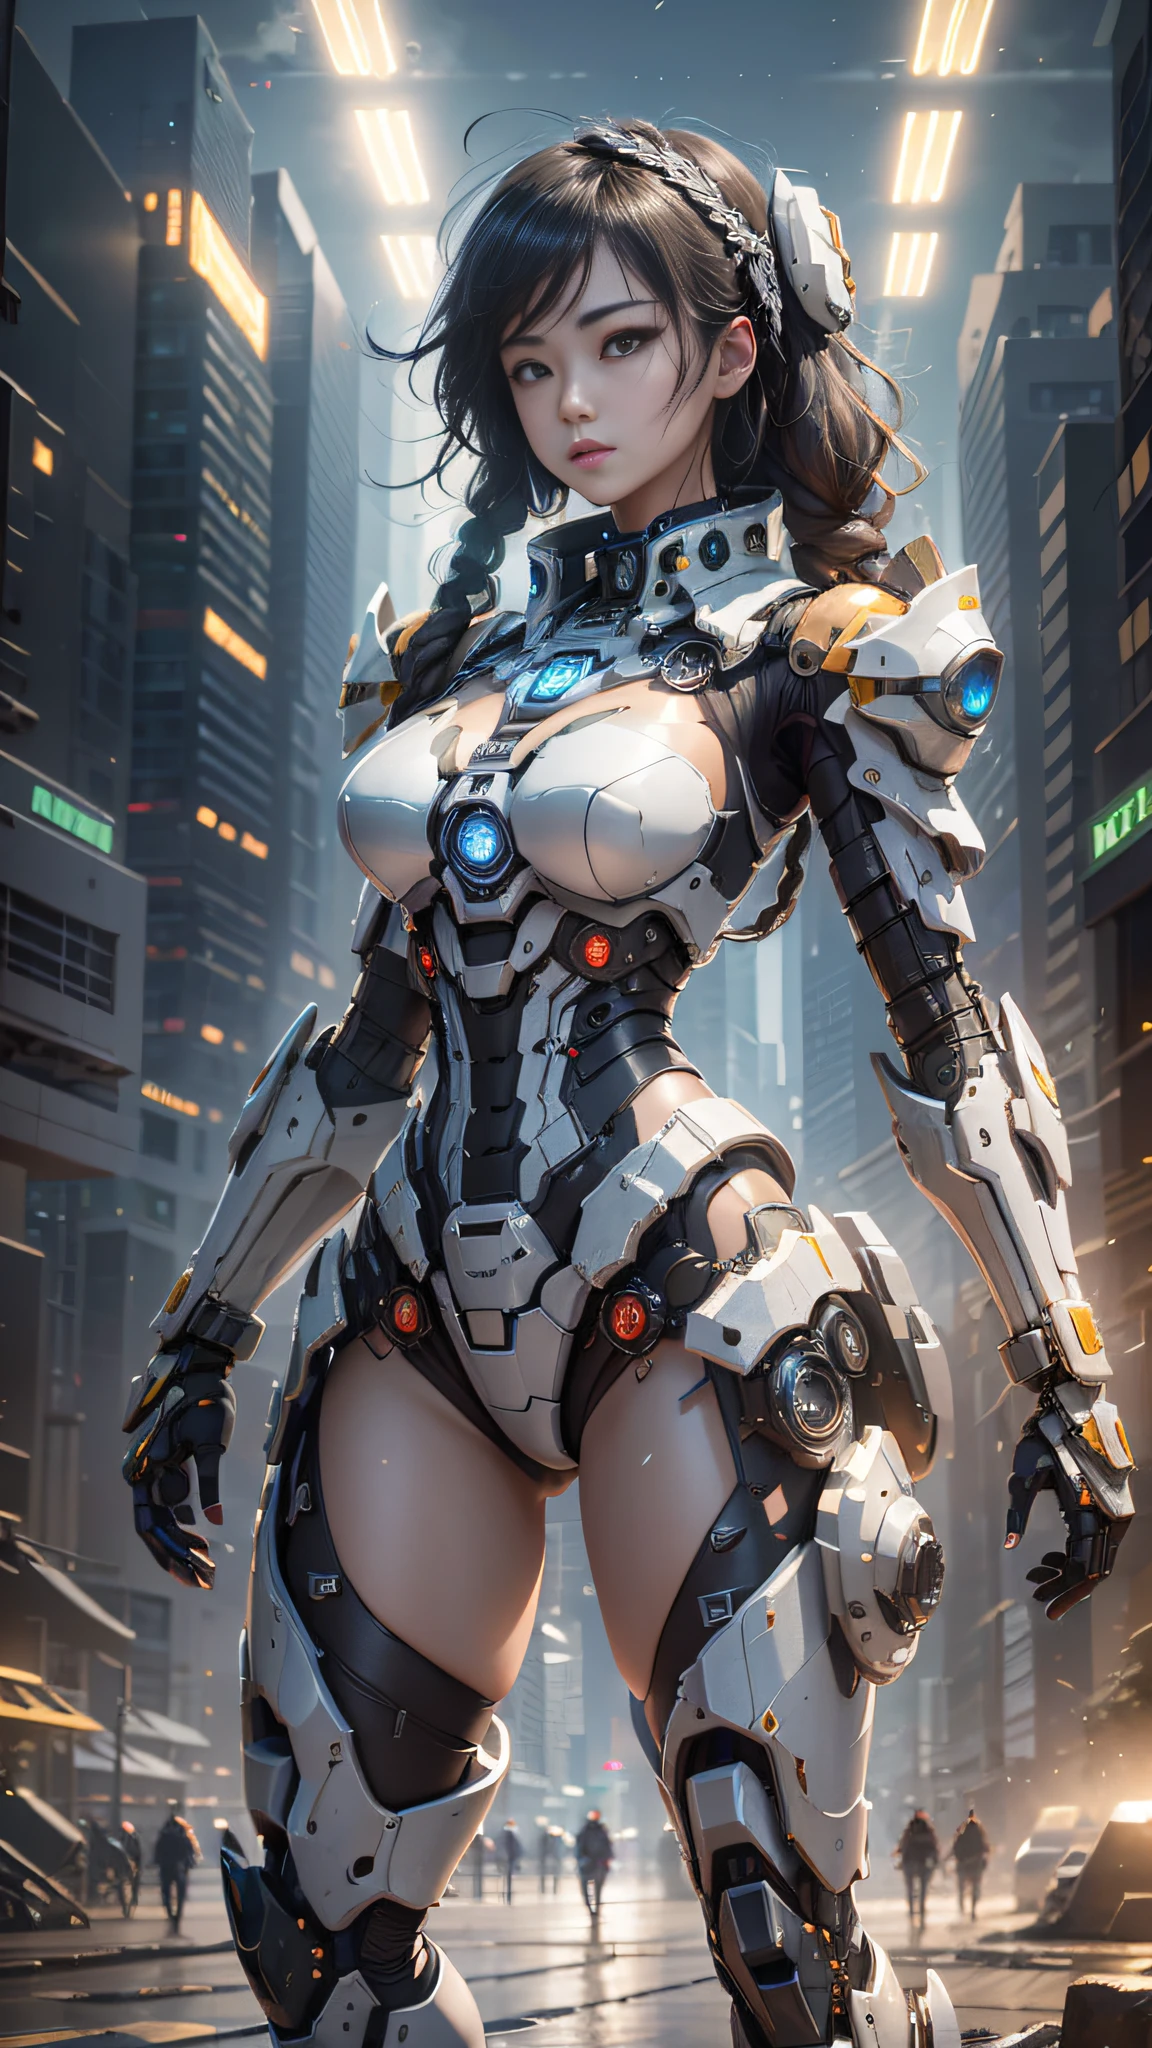 ((Best Quality)), ((Masterpiece)), (Very Detailed: 1.3), 3D, Icaru valkirie-mecha, Beautiful cyberpunk woman using crown, sci-fi technology, HDR (High Dynamic Range), ray tracing, nvidia RTX, super resolution, unreal 5, subsurface scattering, PBR texture, post-processing, anisotropic filtering, depth of field, maximum sharpness and sharpness, multi-layer texture, specular and albedo mapping, surface shading, accurate simulation of light-material interactions,  perfect proportions, octane rendering, duotone lighting, low ISO, white balance, rule of thirds, wide aperture, 8K RAW, high efficiency subpixels, subpixel convolution, light particles, light scattering, Tyndall effect, very sexy, full body, battle pose, black hair with braids,